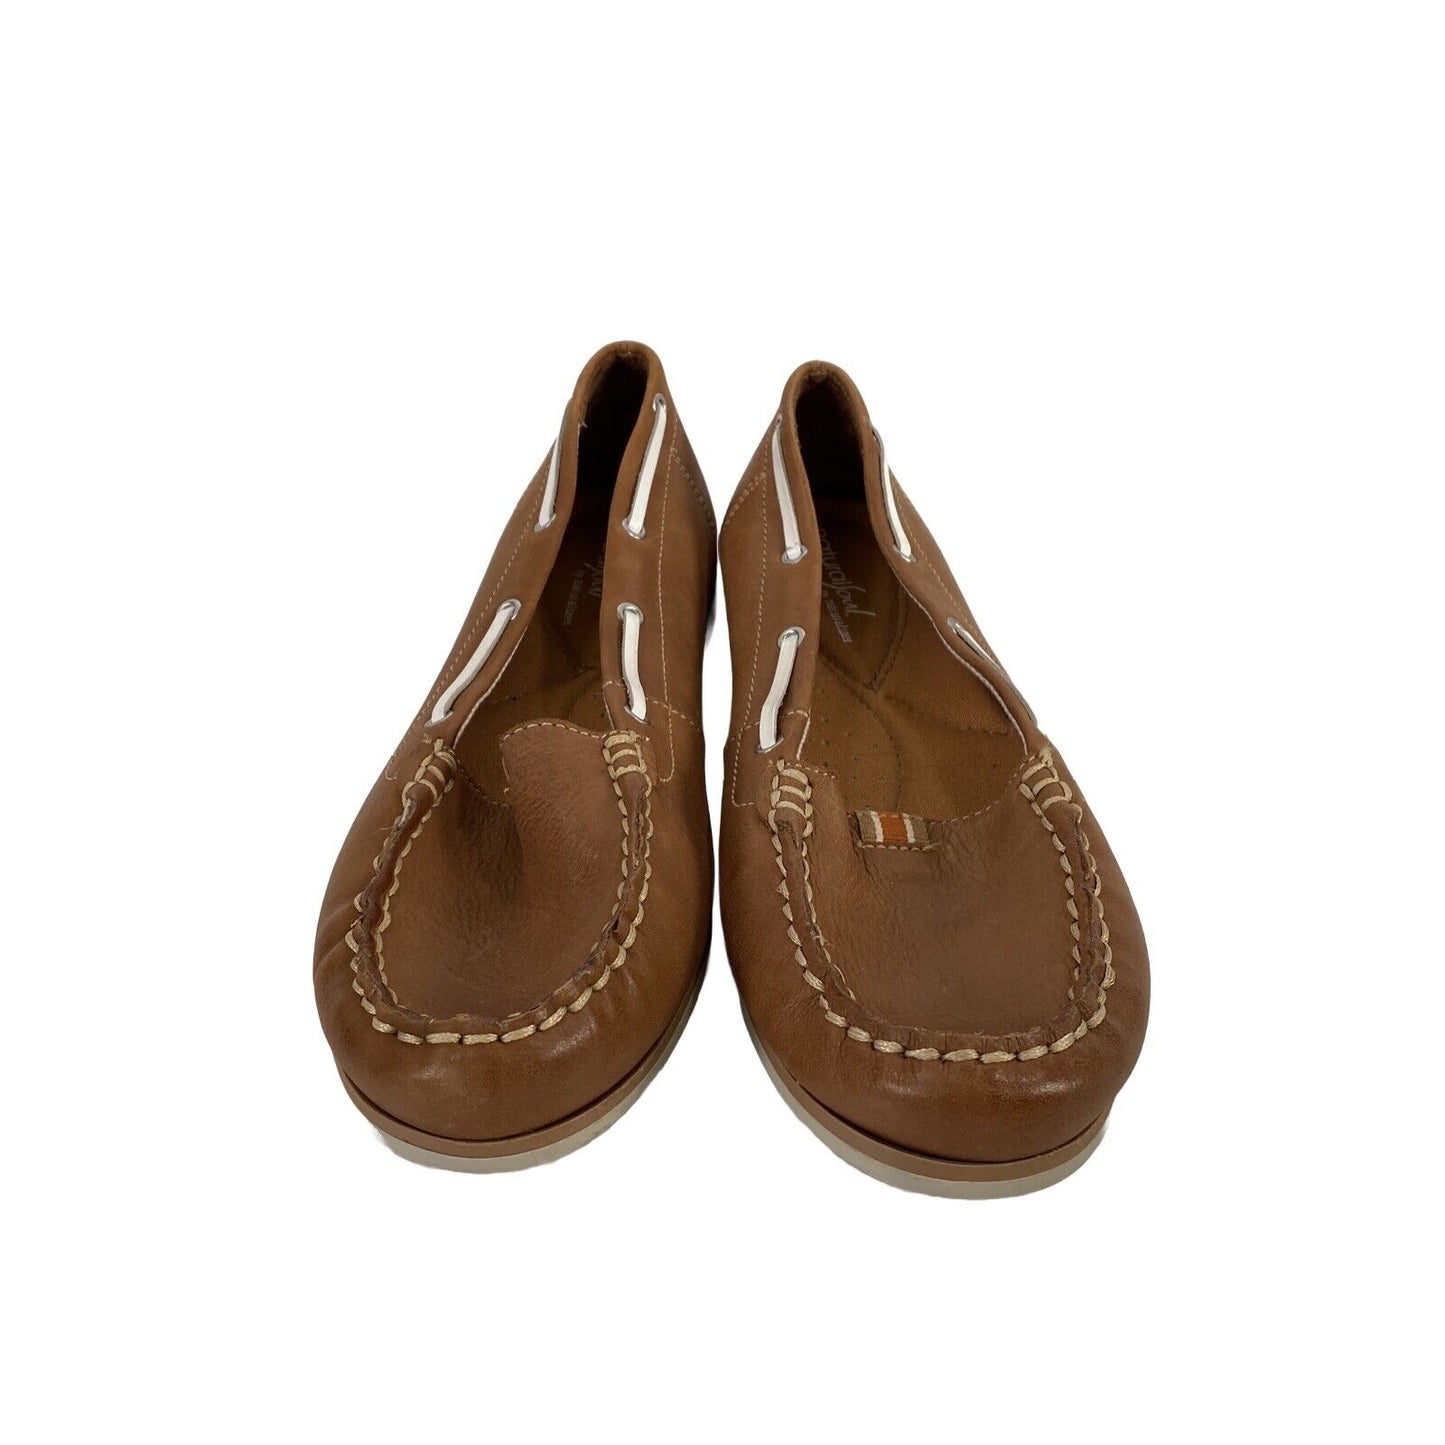 Naturalizer Natural Soul Women's Brown Leather Boat Shoes Flats - 8.5 M